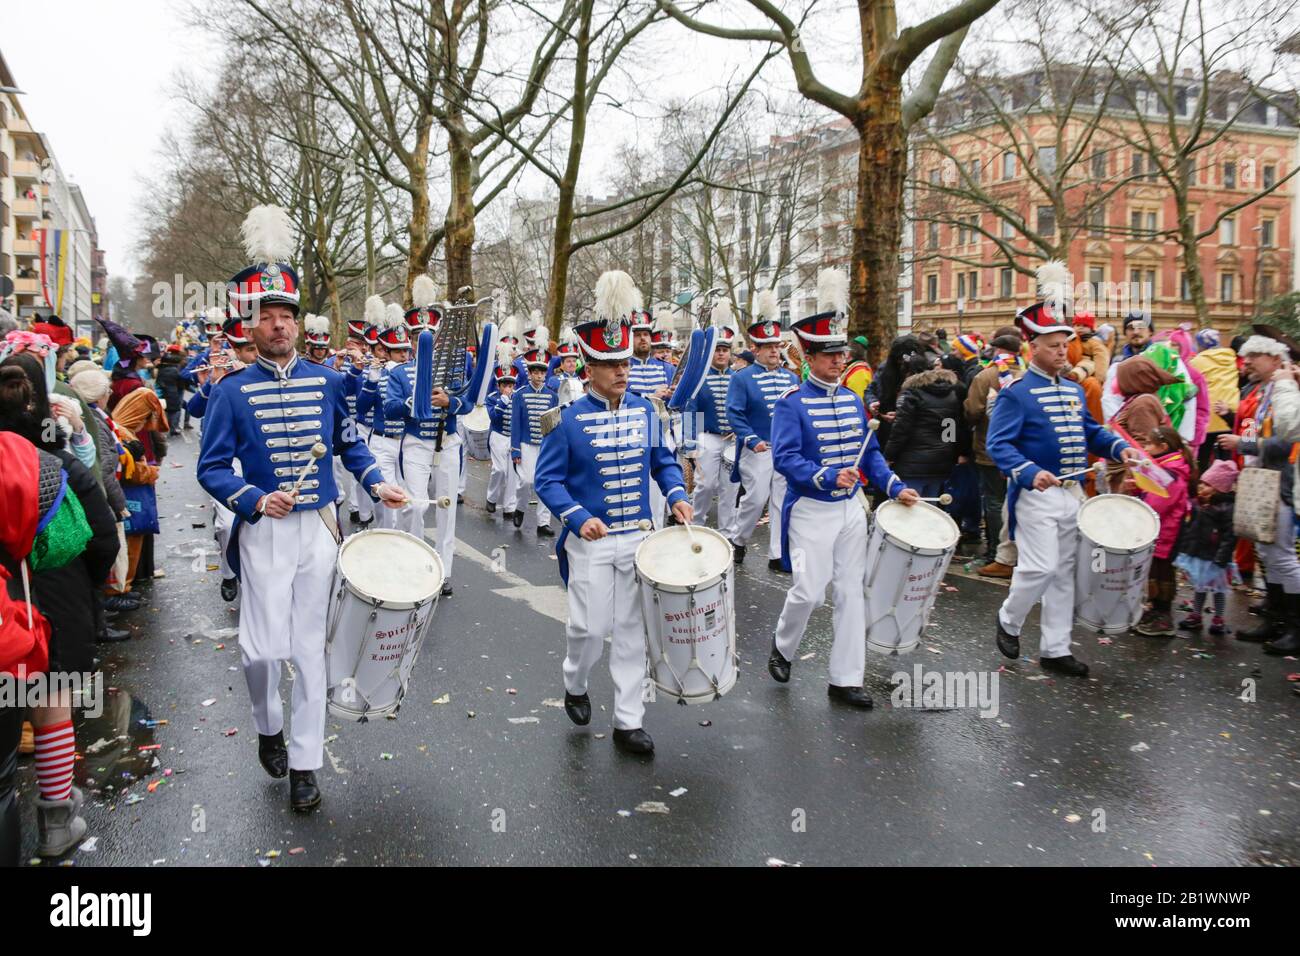 Mainz, Germany. 24th February 2020. Members of the marching band Spielmannszug der Kgl. Bayer. Landwehr Esselbach march in the Mainz Rose Monday parade. Around half a million people lined the streets of Mainz for the traditional Rose Monday Carnival Parade. The 9 km long parade with over 9,000 participants is one of the three large Rose Monday Parades in Germany. Stock Photo